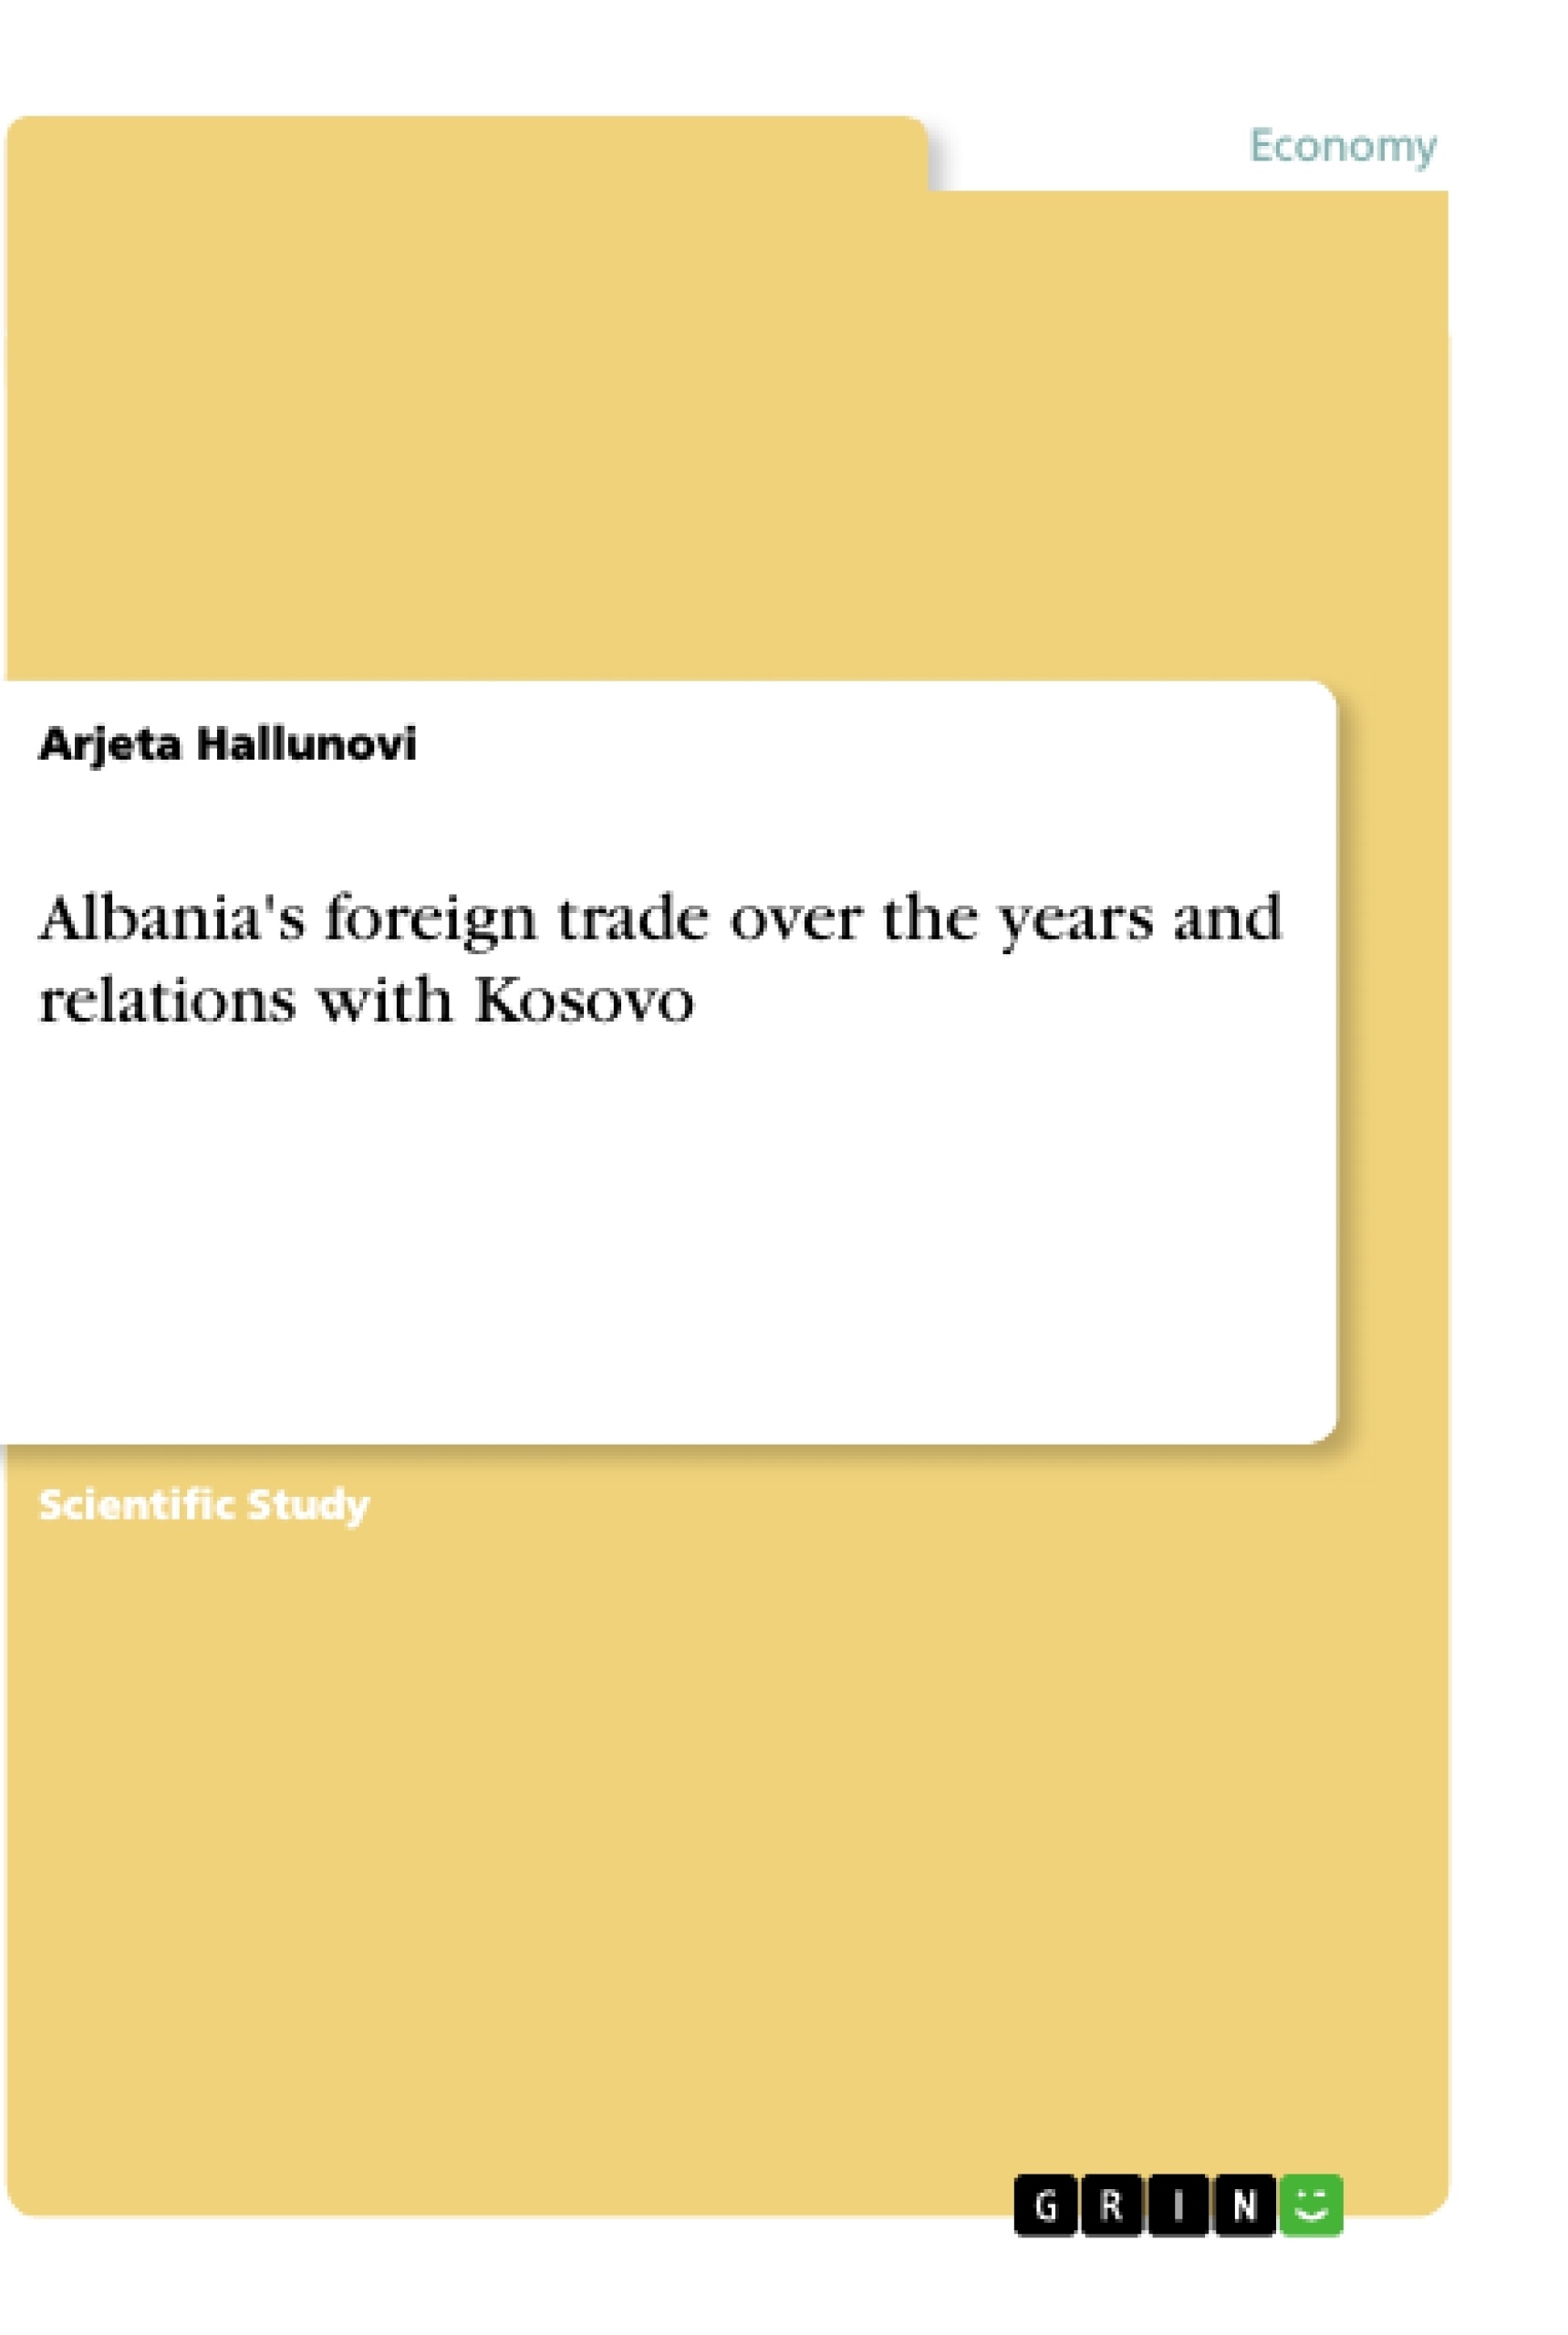 Titel: Albania's foreign trade over the years and relations with Kosovo